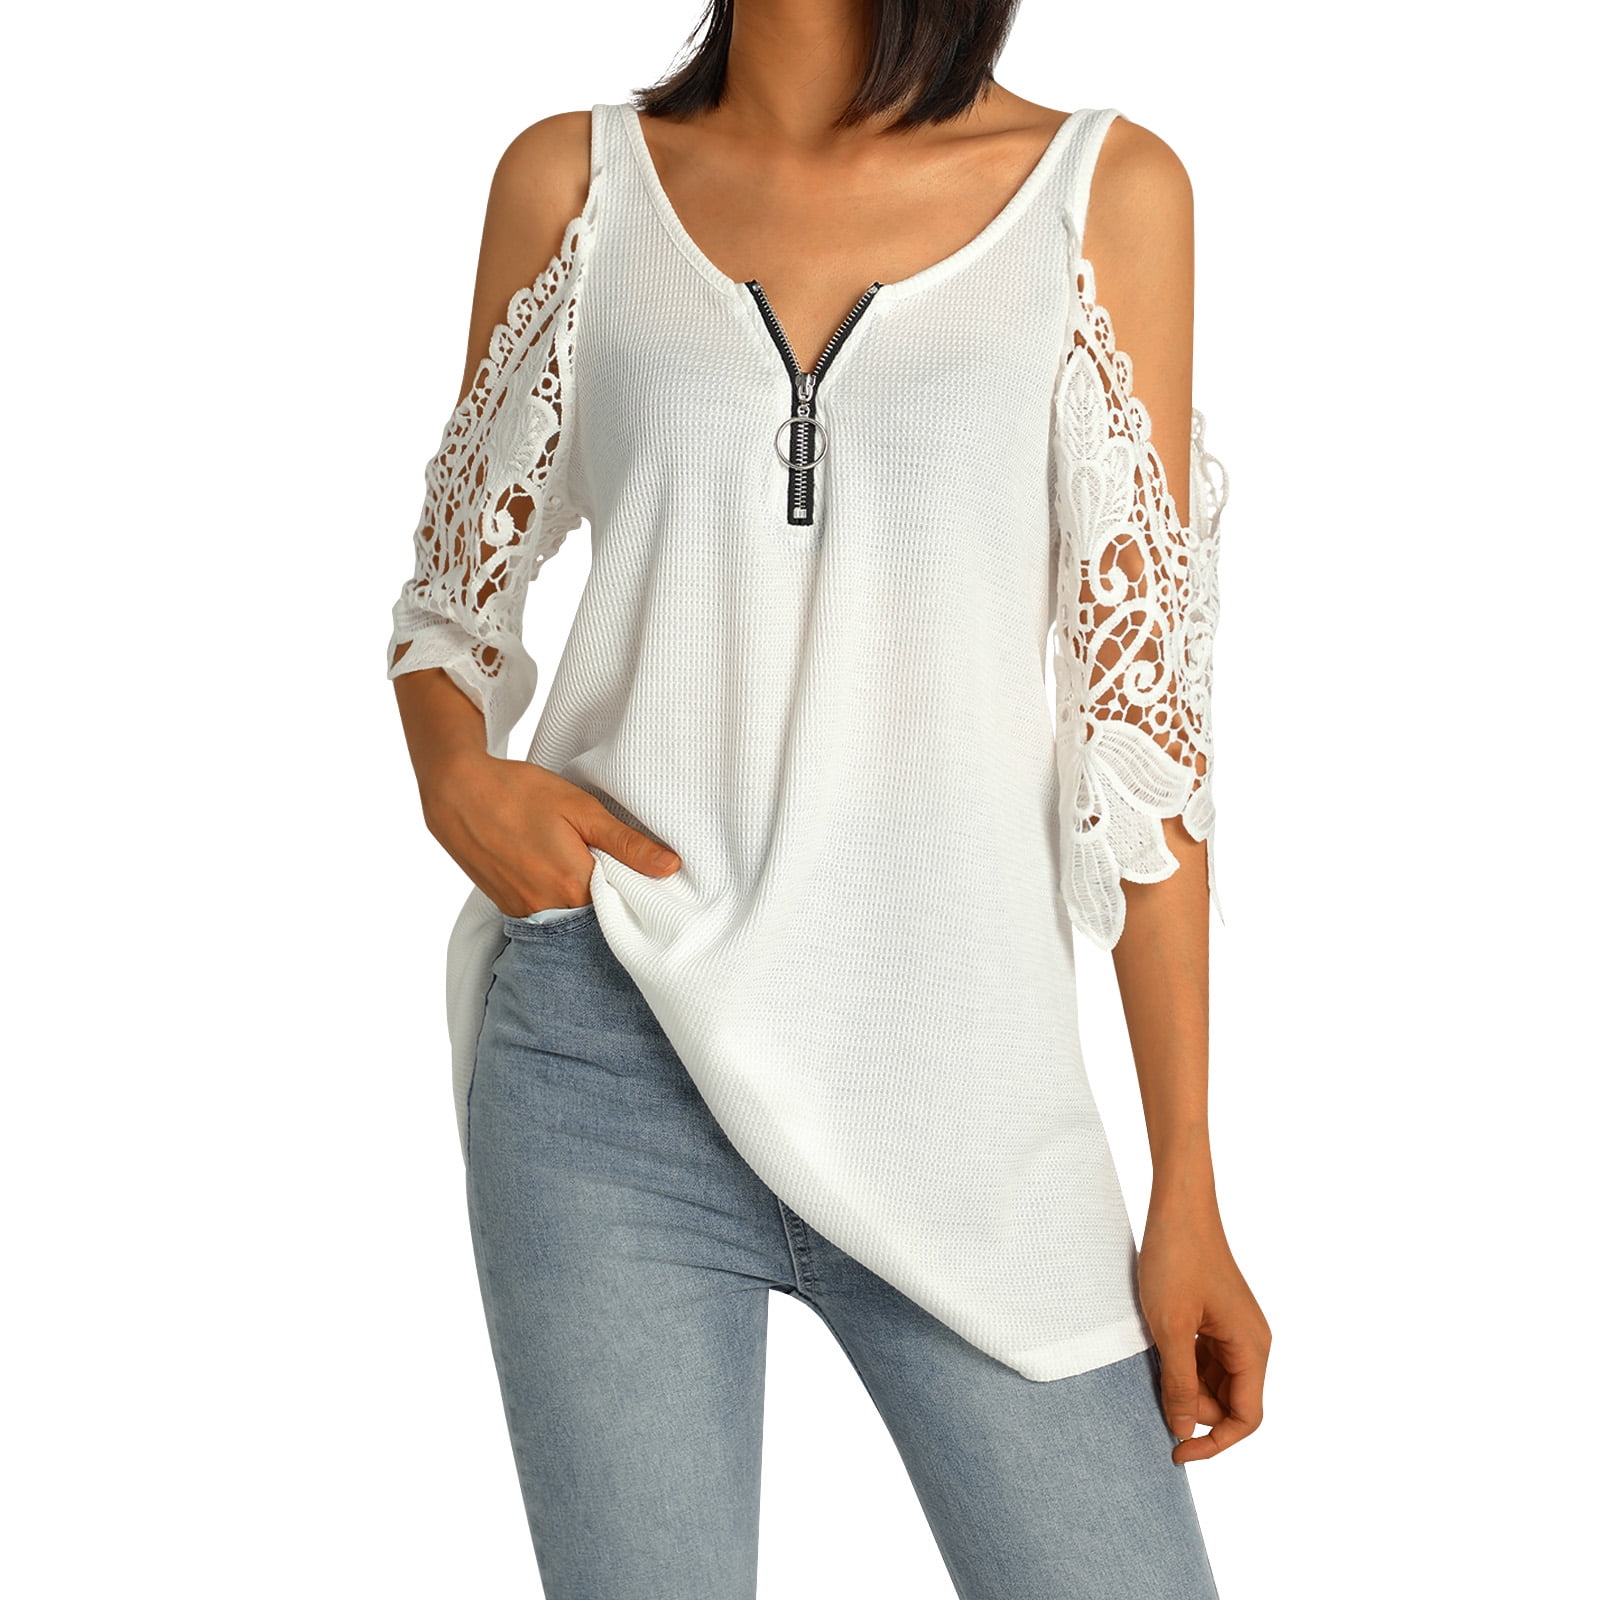 Women's Cold Shoulder Tops Summer Casual Short Sleeve Lace Loose Shirts Blouses